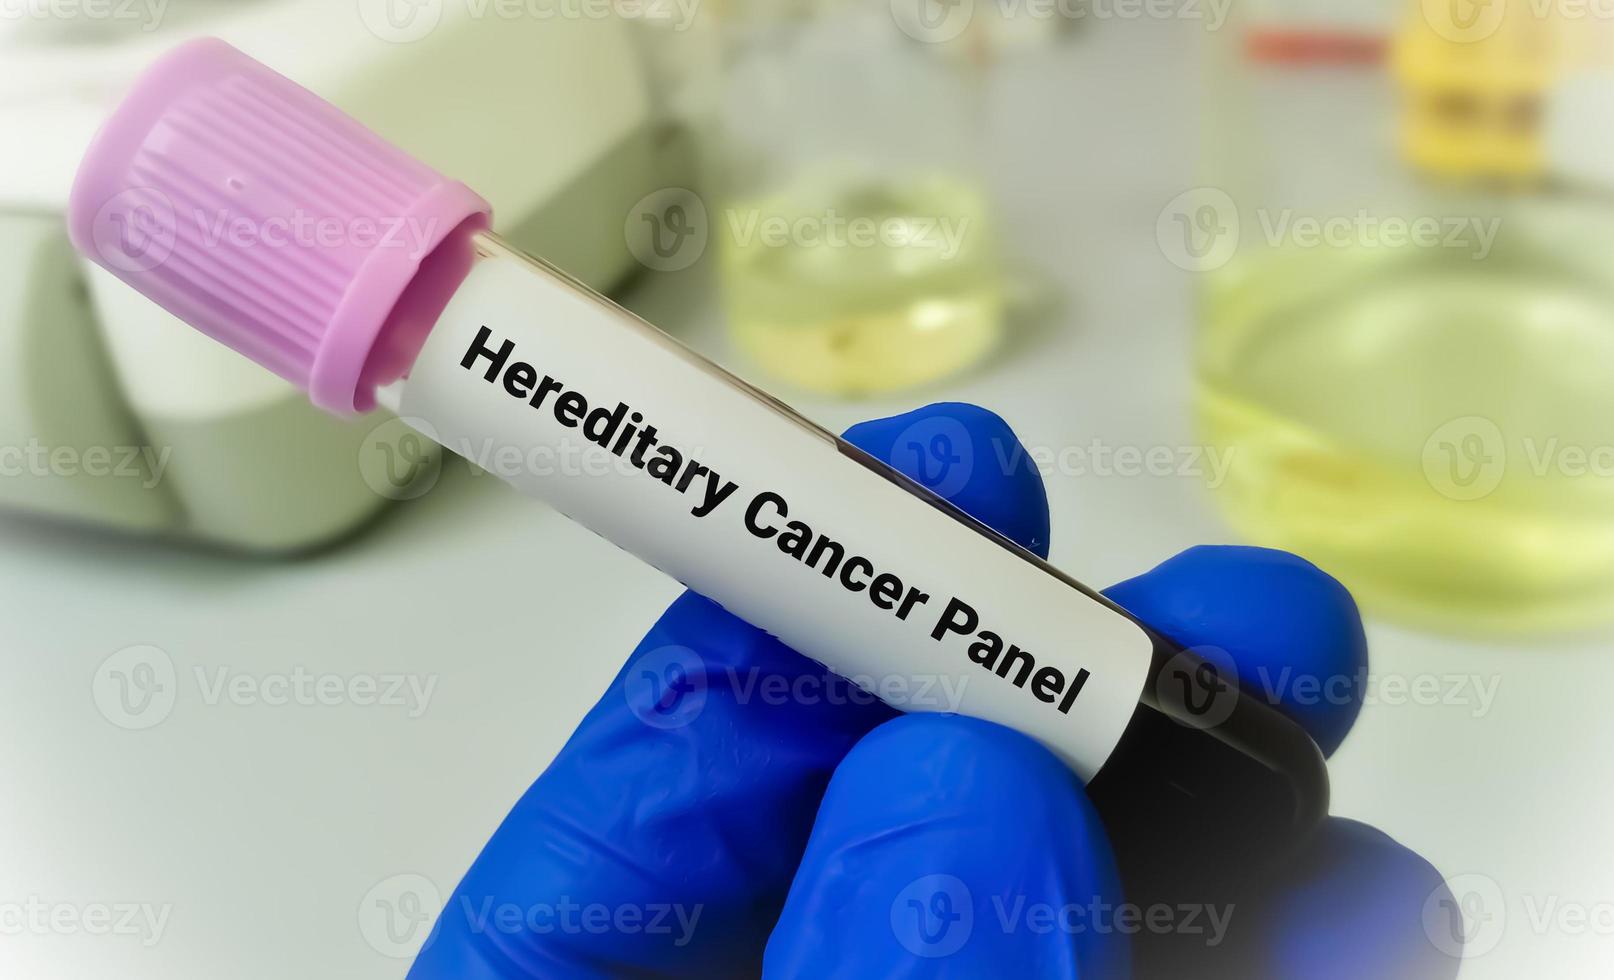 Blood sample for hereditary cancer panel test, including the detection of 47 genes associated with hereditary breast, ovarian, uterine, colorectal, melanoma, and prostate cancer. photo